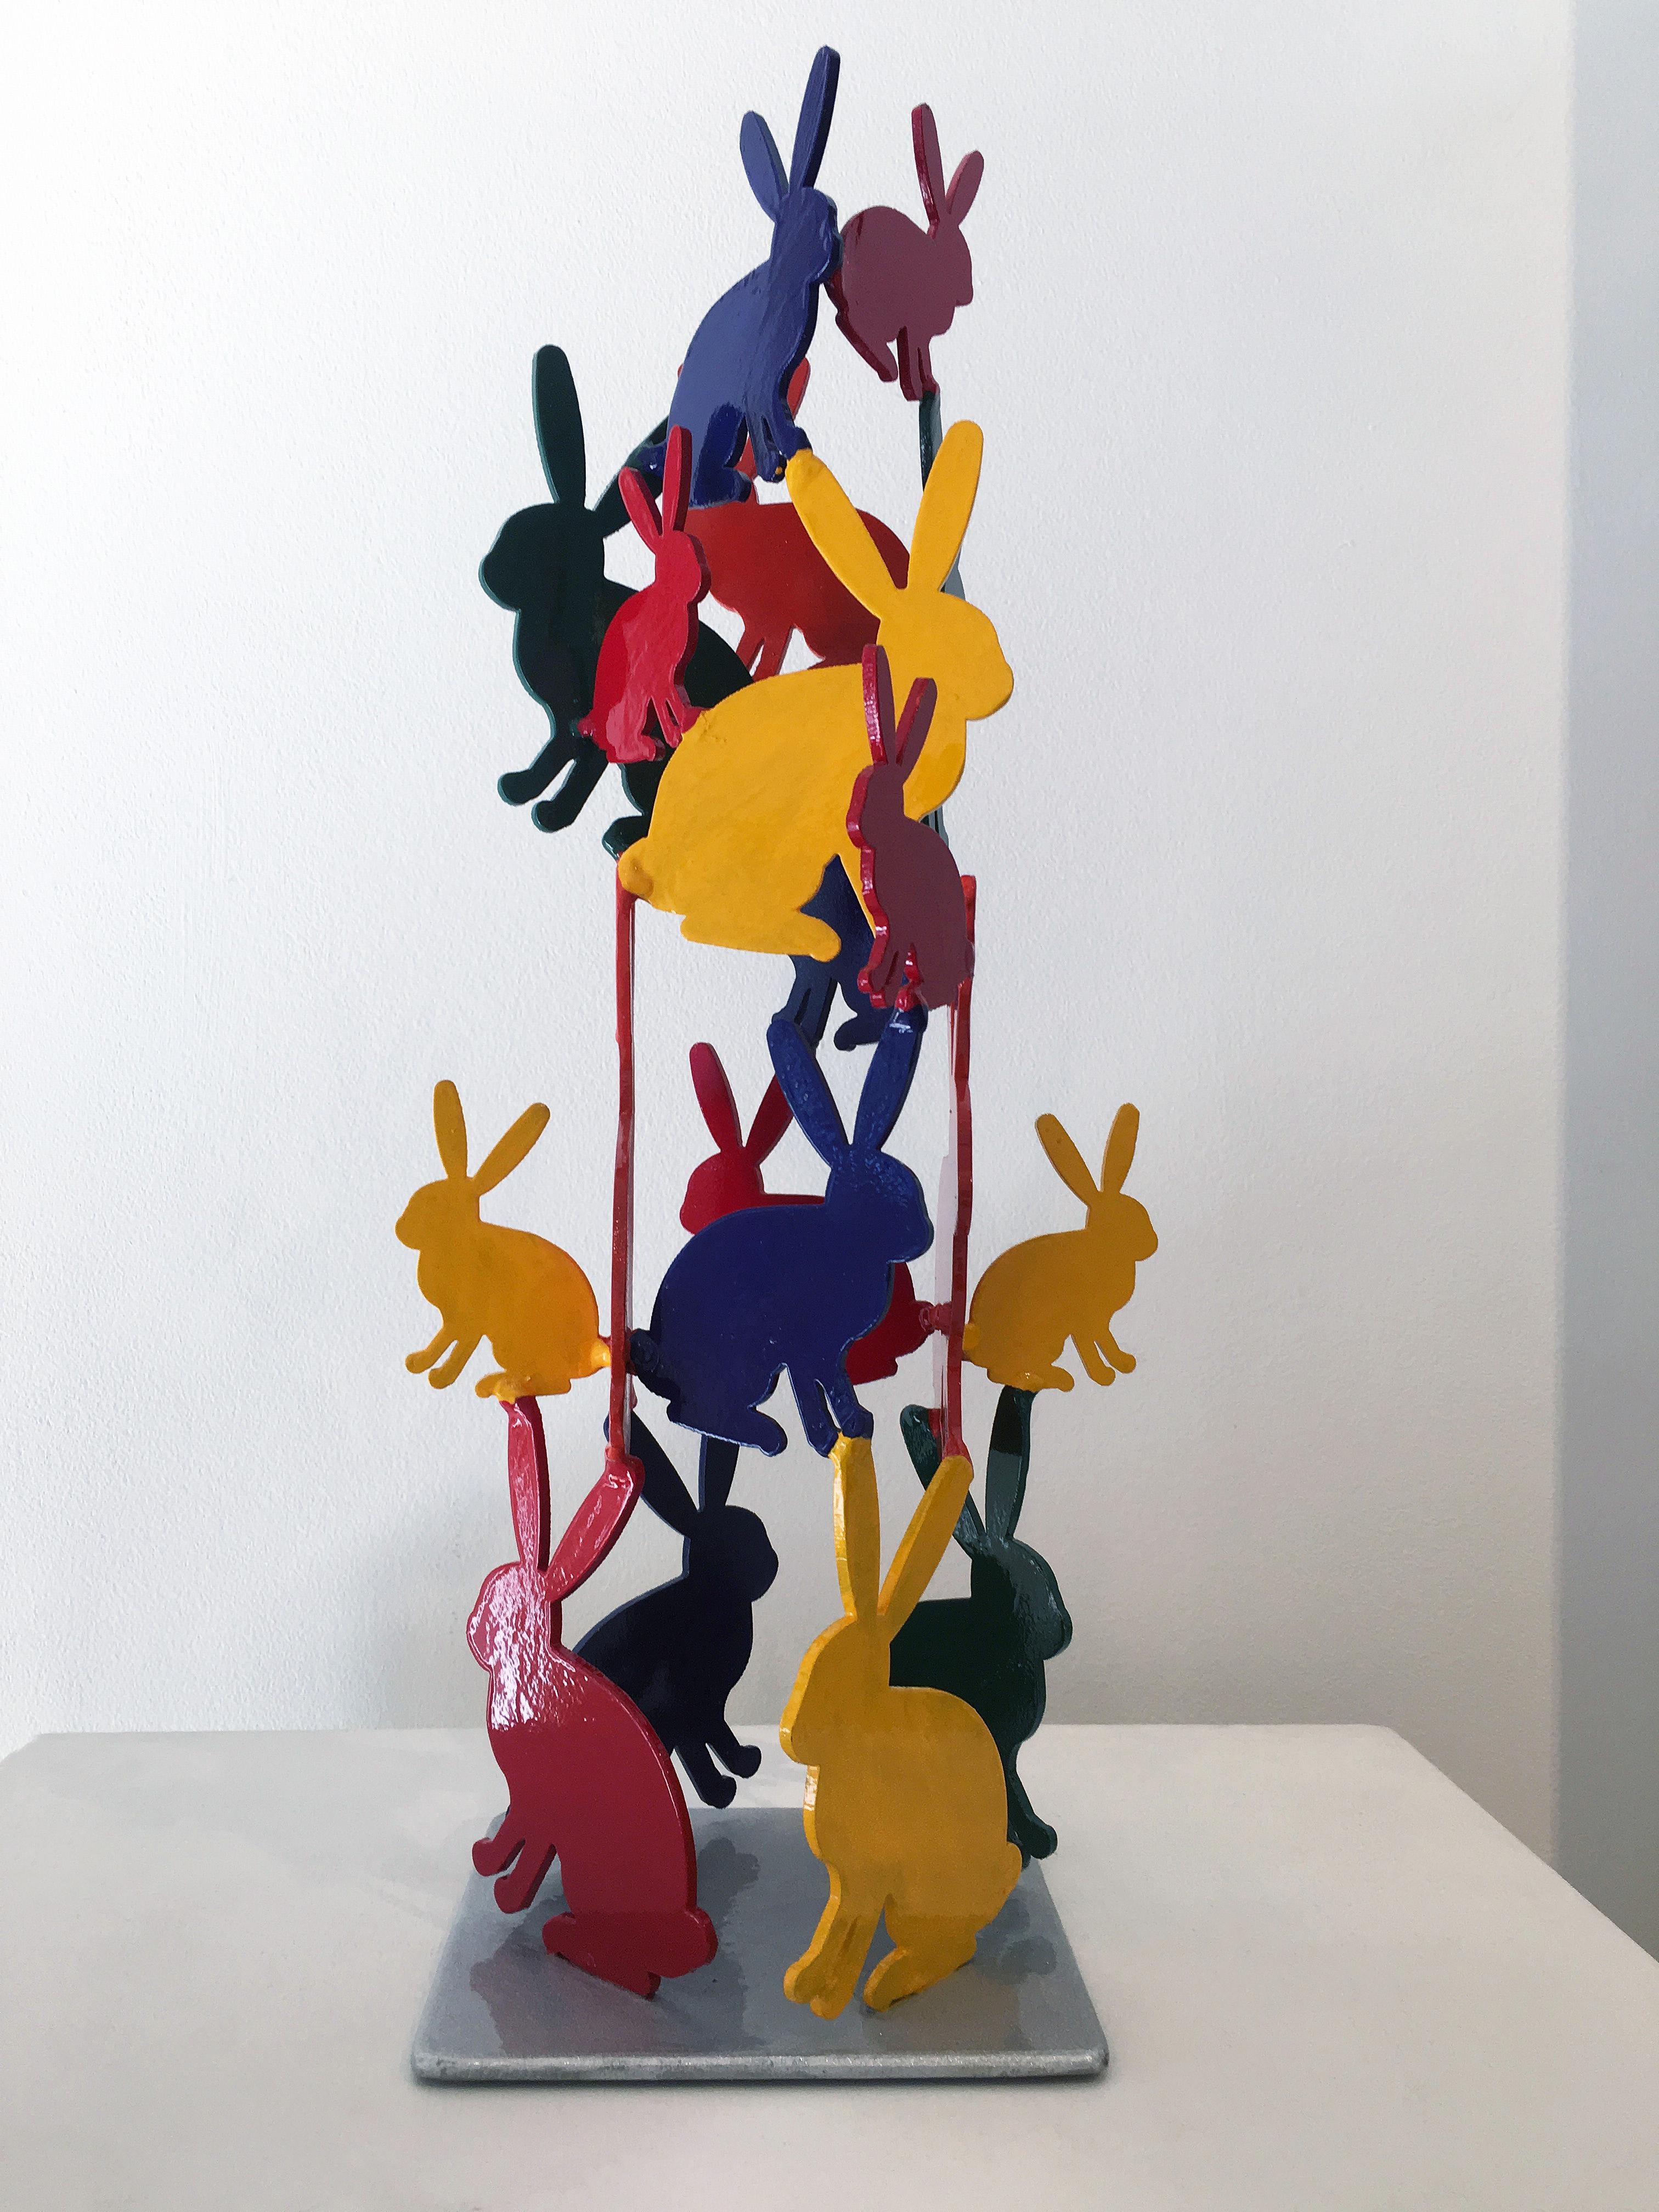 'Untitled' 2019 by renowned New York City artist, Hunt Slonem. Acrylic on aluminum, 18 x 6 x 6 in. This aluminum sculpture features a plethora of cut-out bunnies in a variety of sizes on a metal plate stand. The bunnies are painted in four main